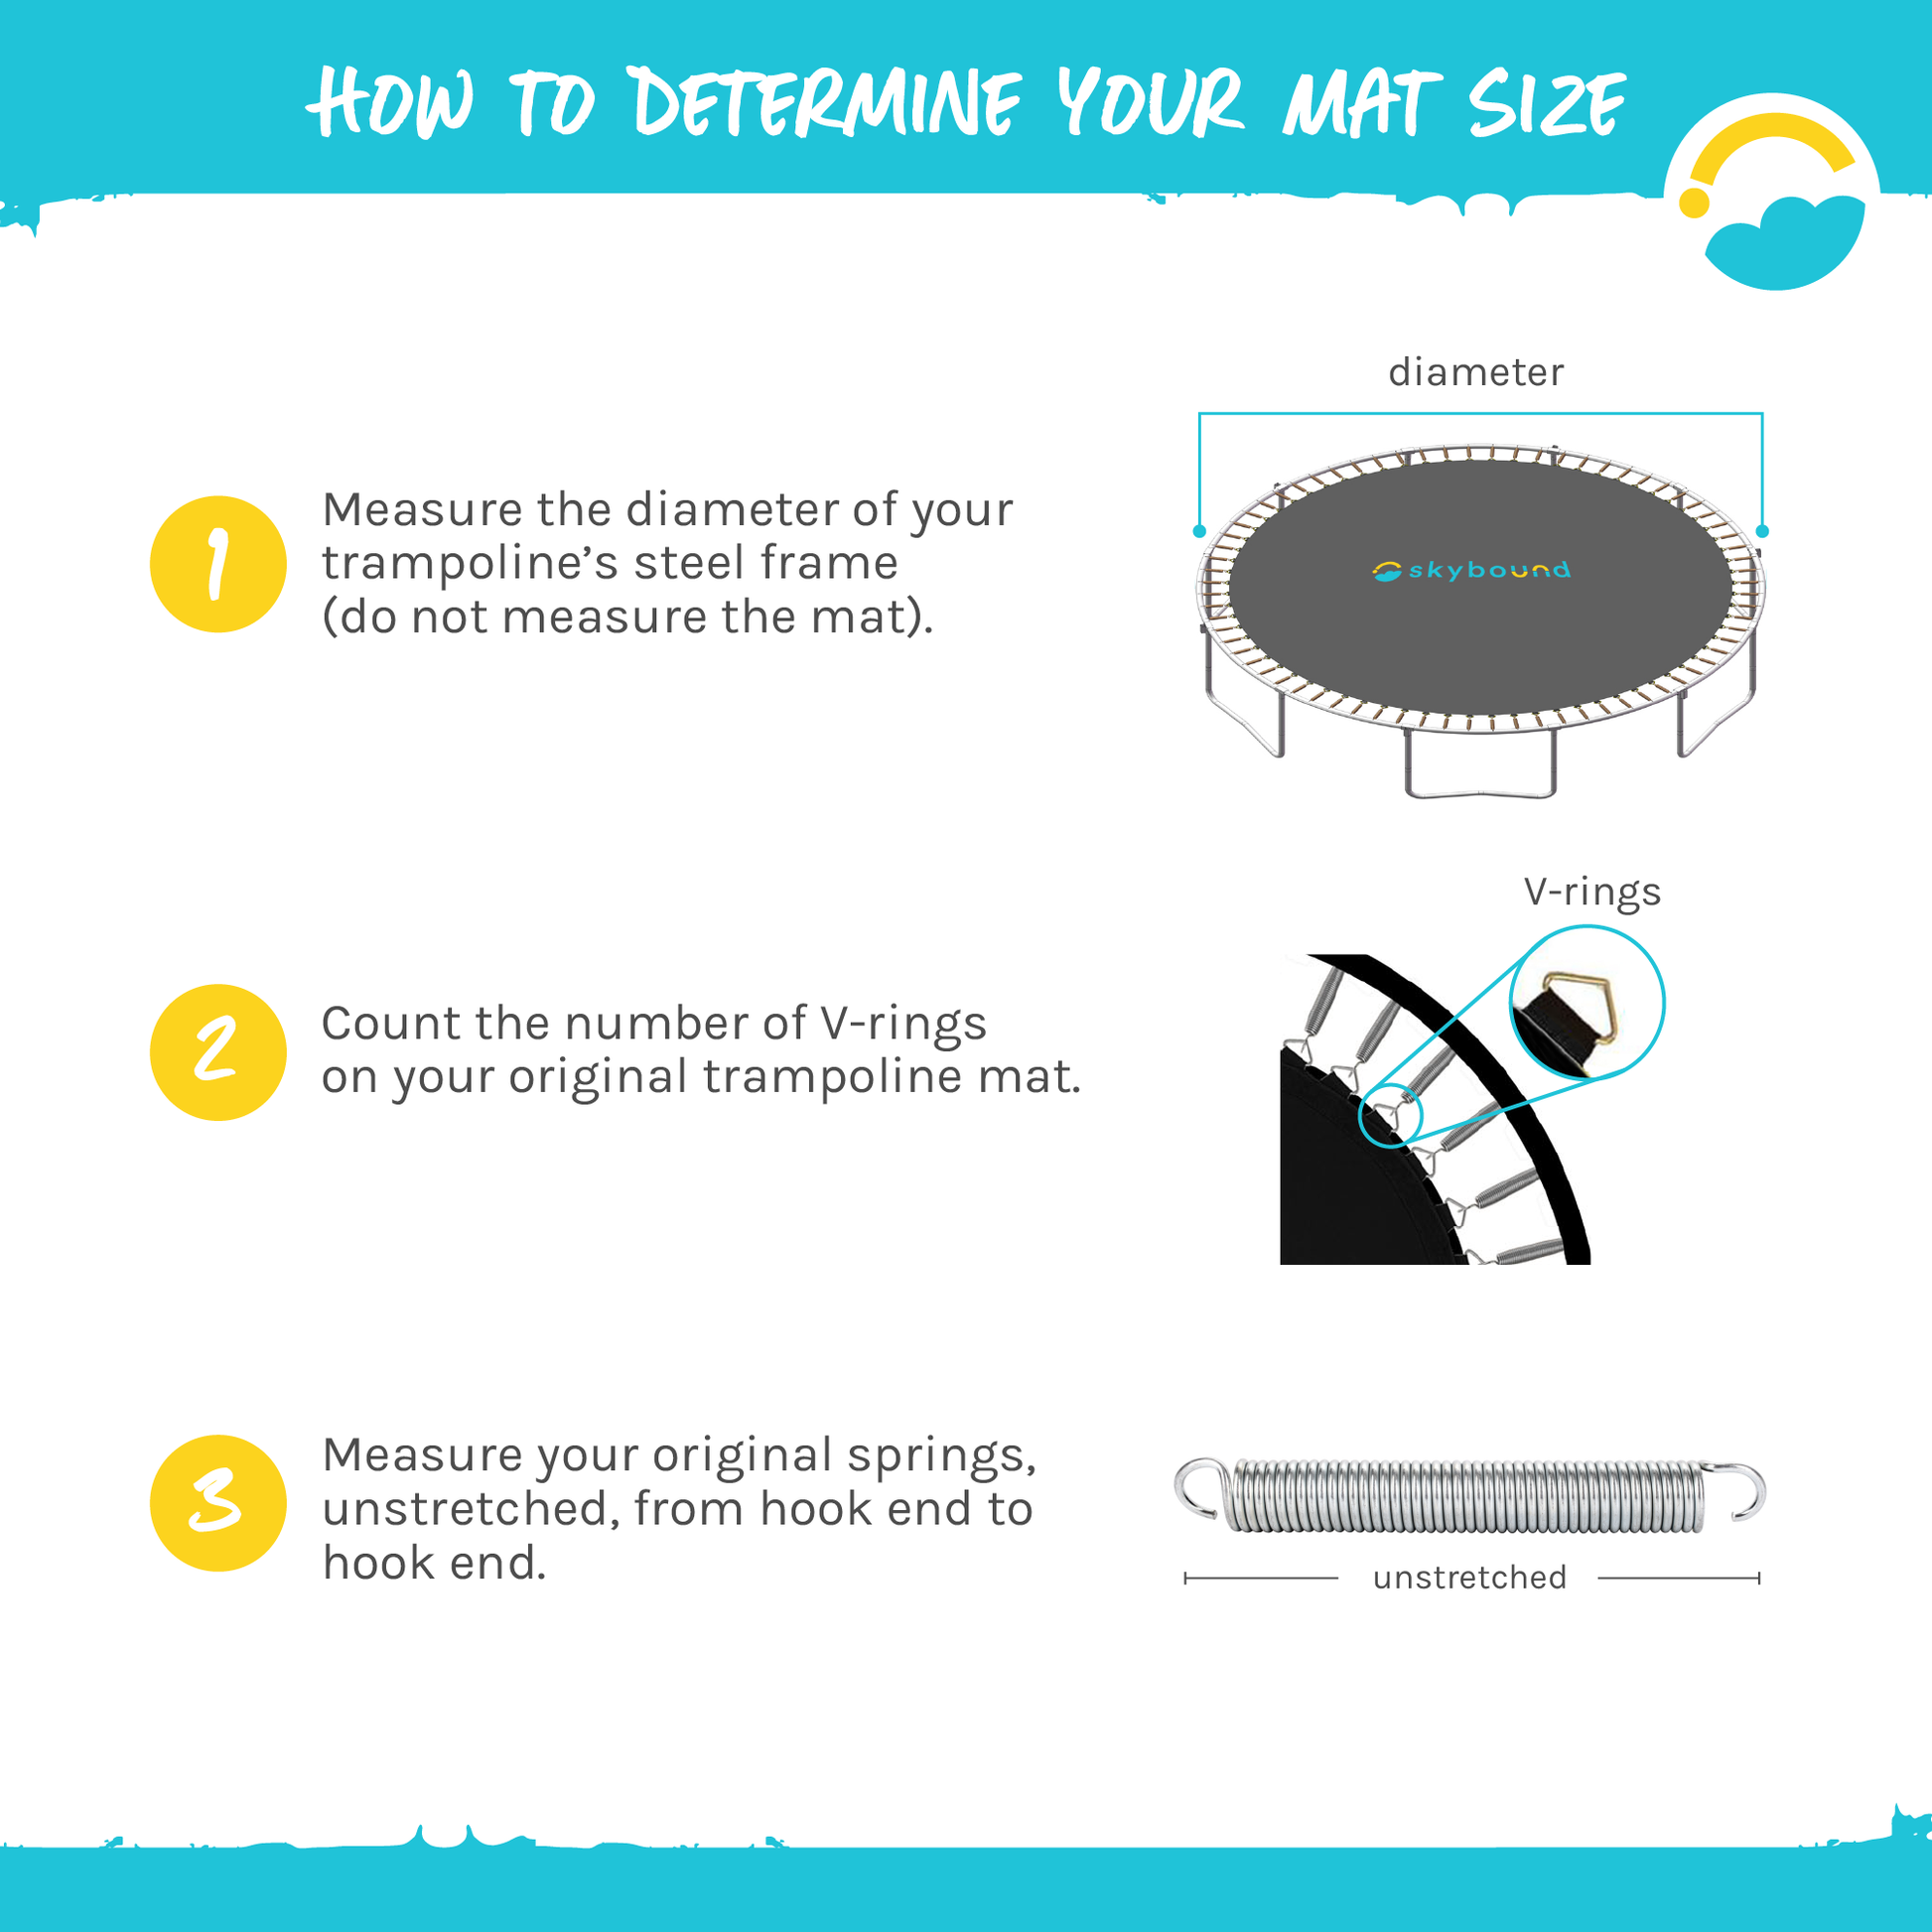 How to Determine your Mat Size: 1-Measure the diameter of your trampoline's steel frame (do no measure the mat). 2-Count the number of V-rings on your original trampoline mat. 3-Measure your original springs, upstretched, from hook-end to hook-end.